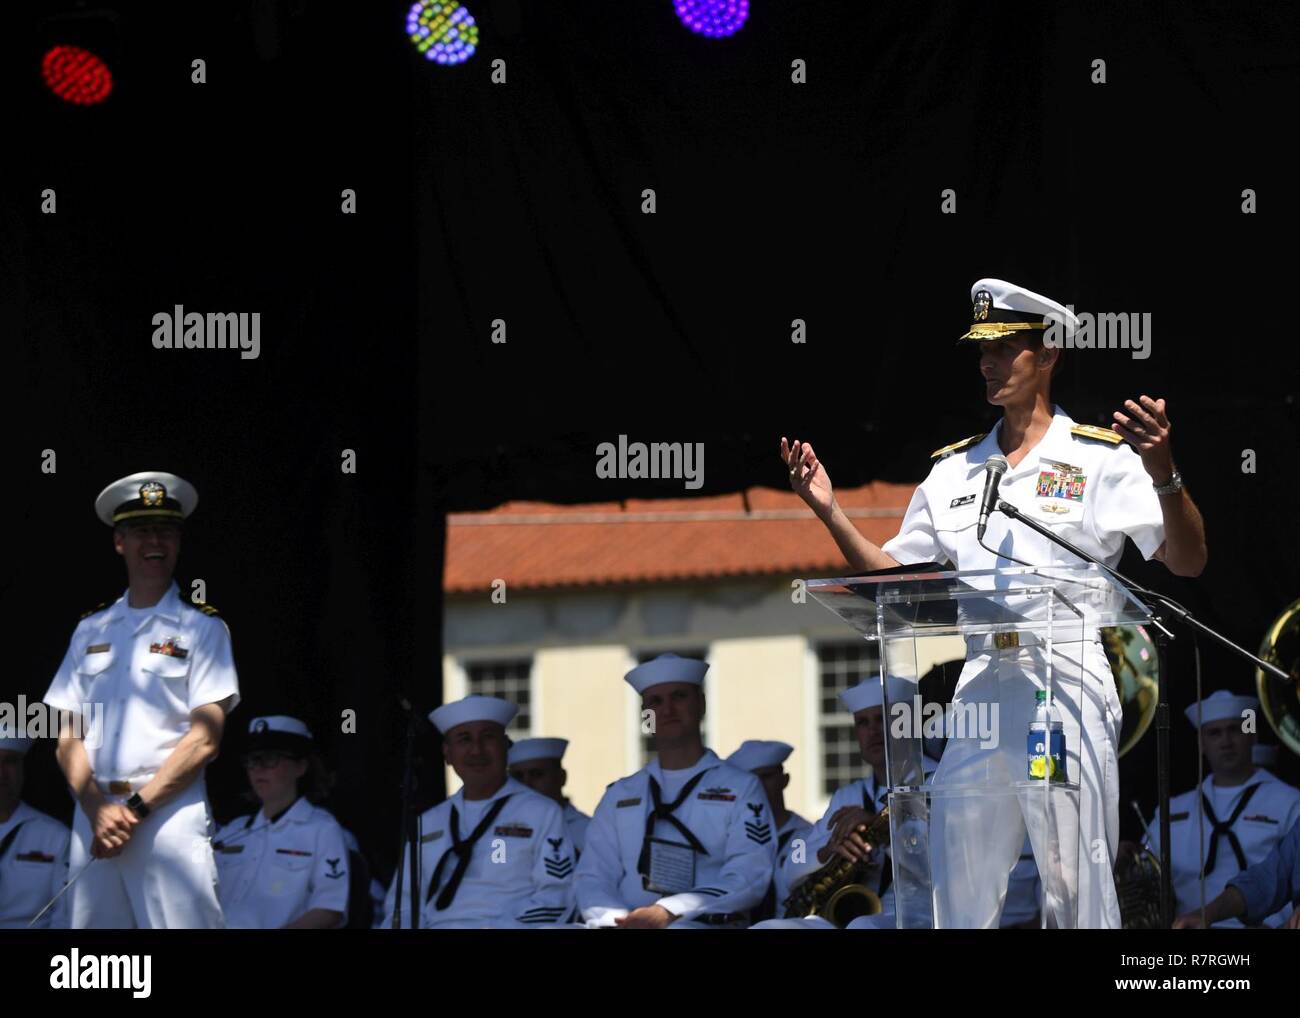 BILOXI, Miss. (April 1, 2017) Rear Admiral Timothy C. Gallaudet, commander, Naval Meteorology and Oceanography Command, recognizes crew members of the Virginia-class fast-attack submarine USS Mississippi (SSN 782) during the official commencement proclamation ceremony for the Mississippi Bicentennial/Navy Week celebration at Centennial Plaza, Gulfport Mississippi. Gulfport/Biloxi is one of select regions to host a 2017 Navy Week, a week dedicated to raise U.S. Navy awareness in through local outreach, community service and exhibitions. Stock Photo